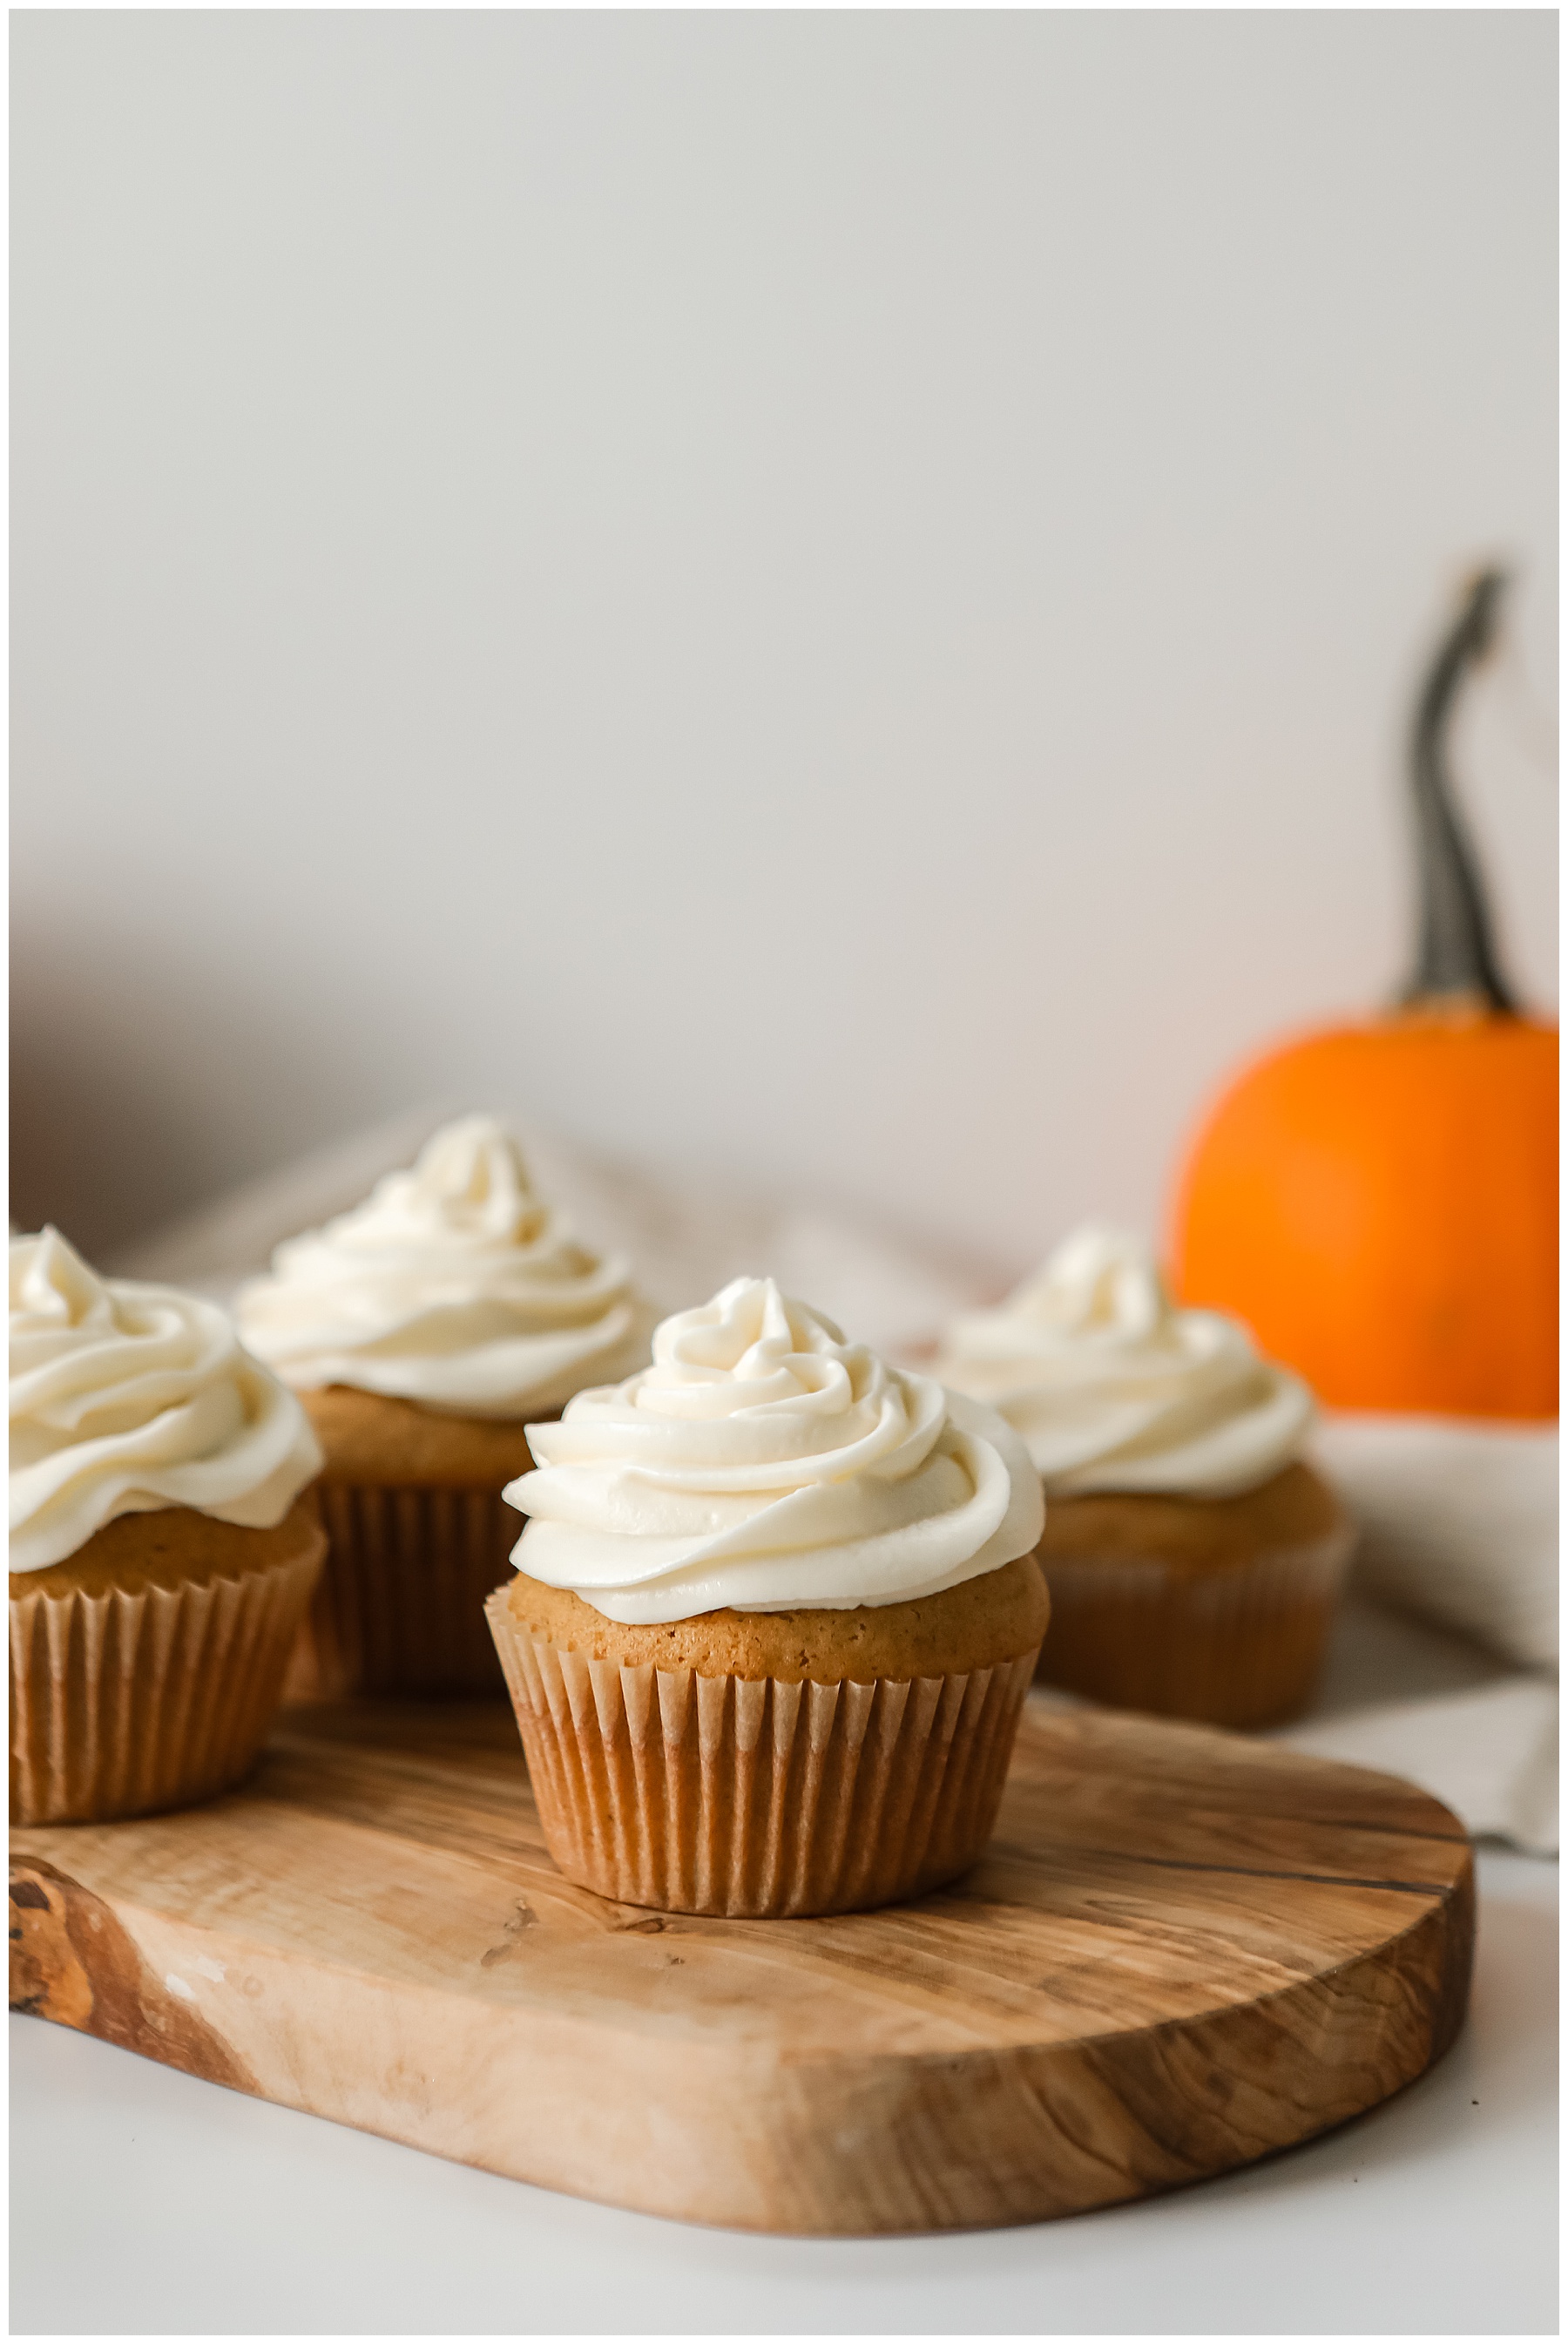 Pumpkin Cupcakes with cream cheese frosting